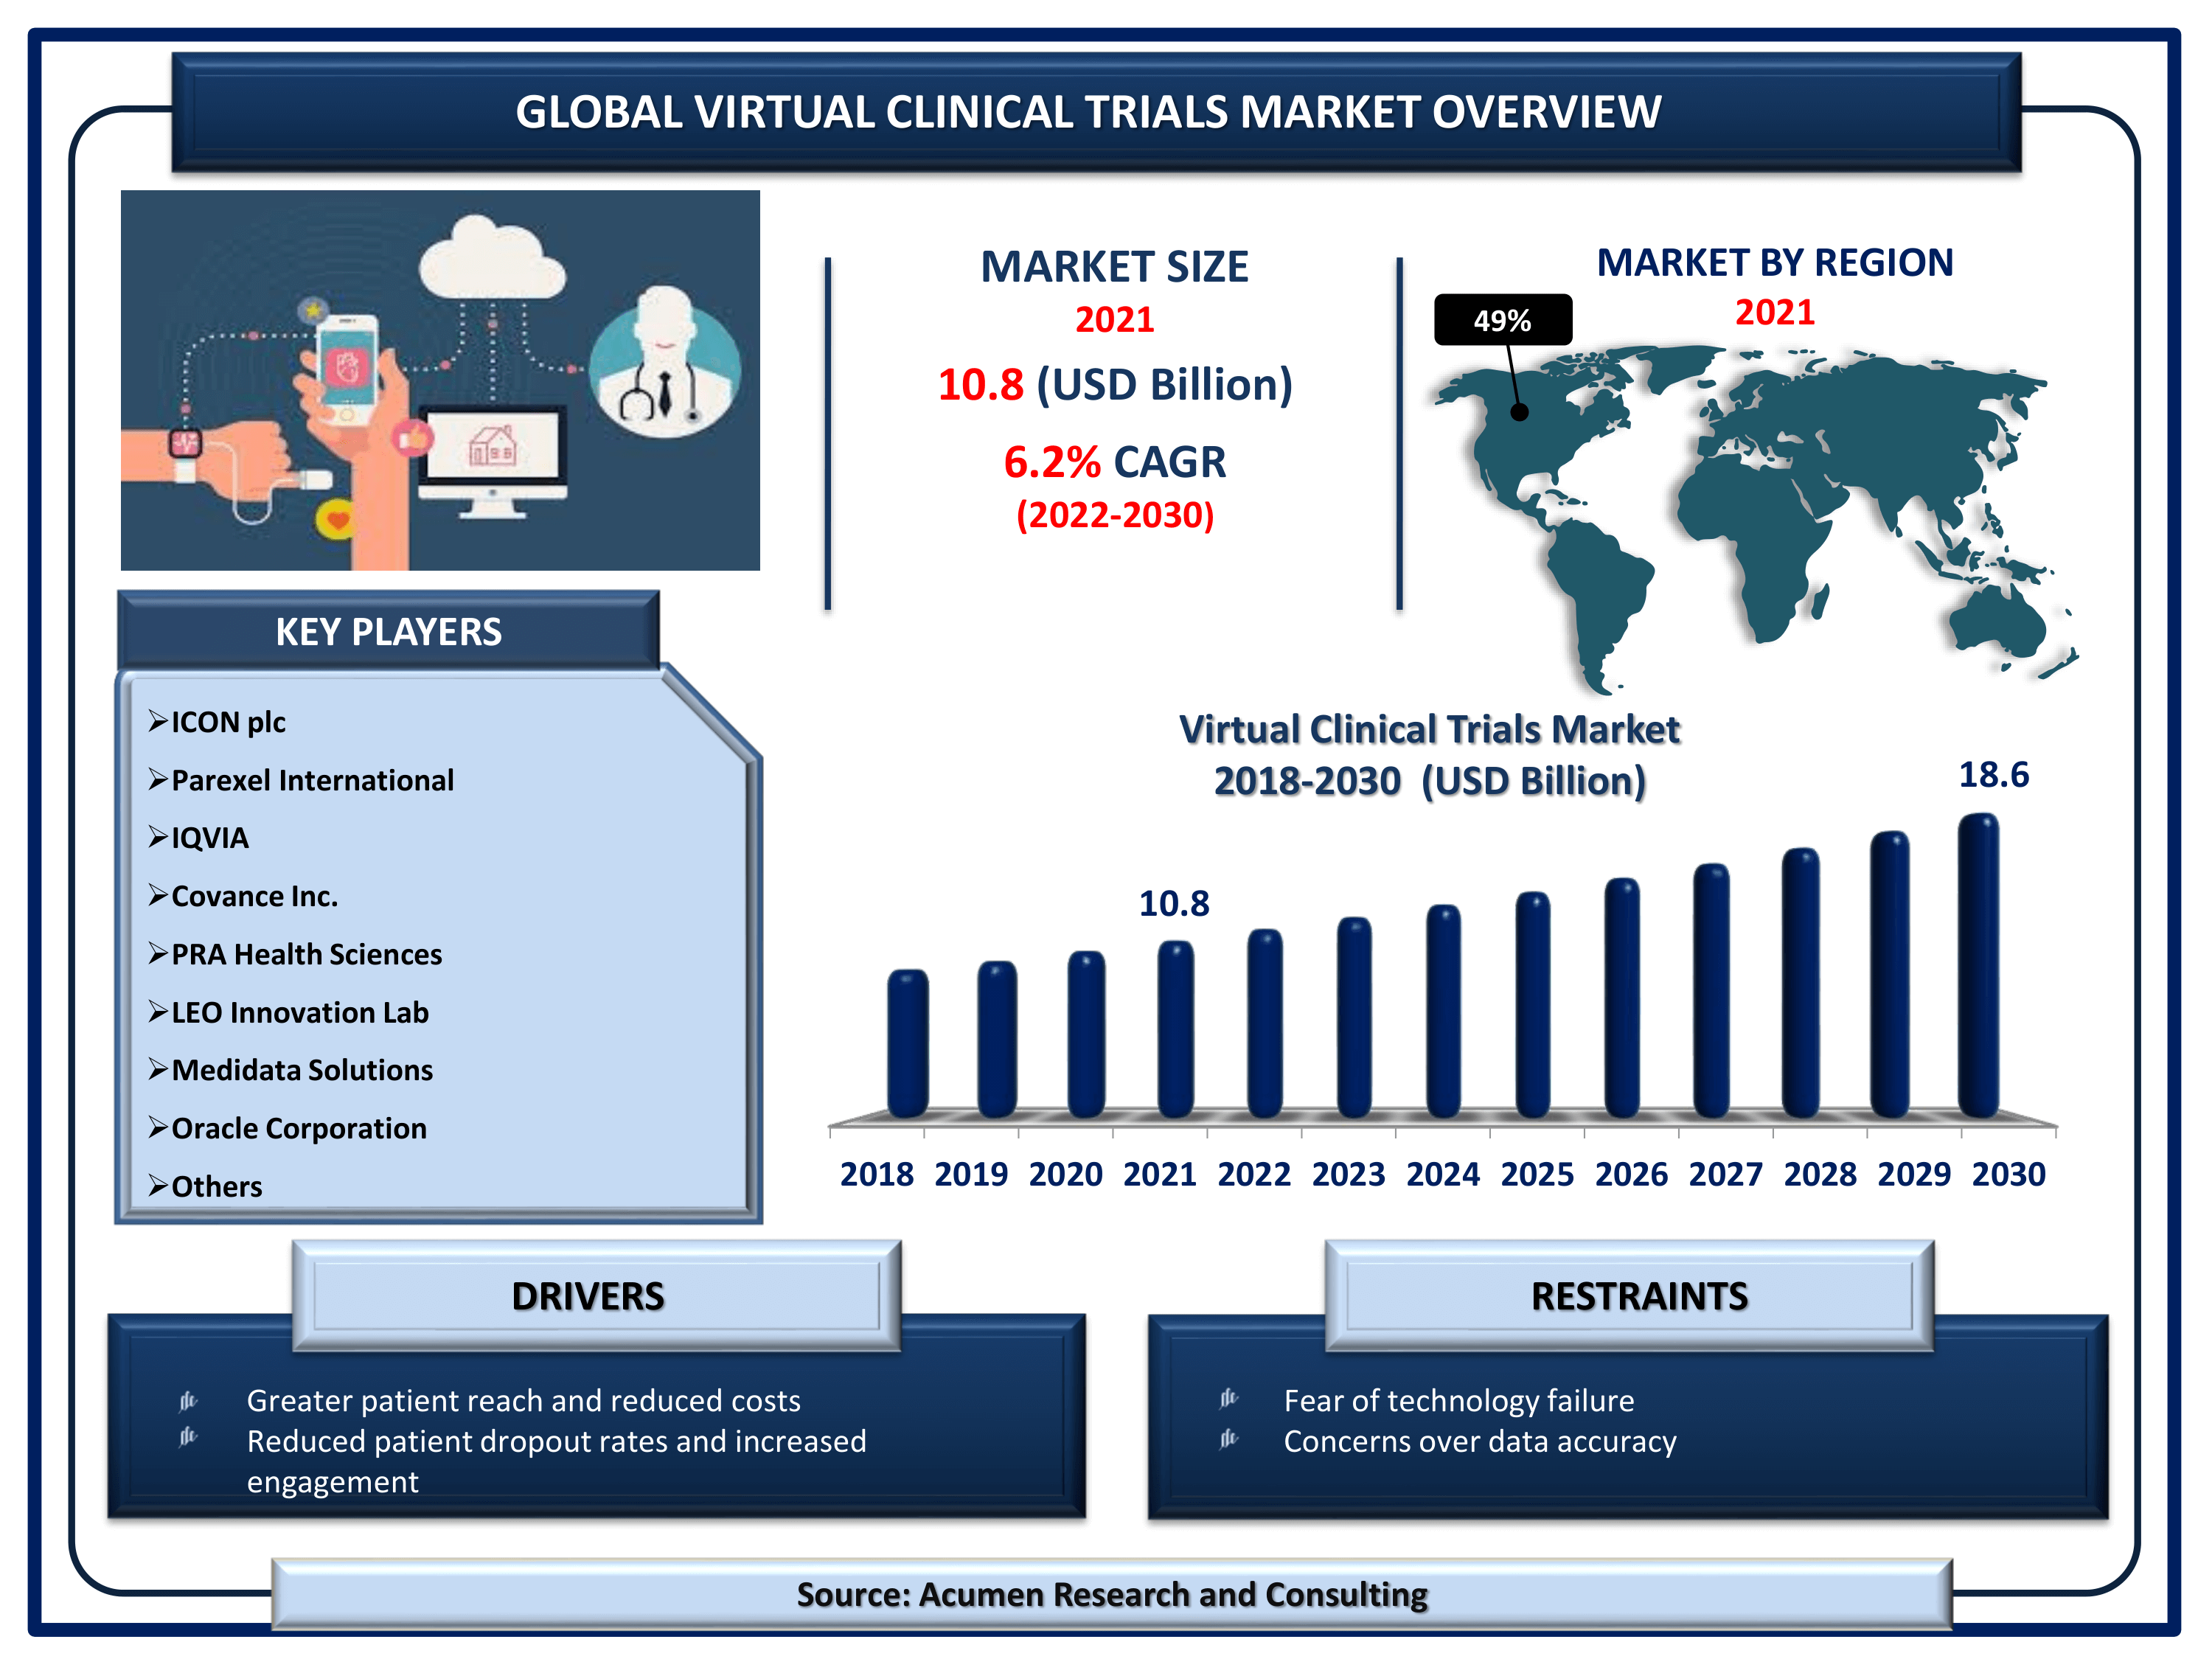 Global virtual clinical trials market revenue is estimated to reach USD 18.6 Billion by 2030 with a CAGR of 6.2% from 2022 to 2030